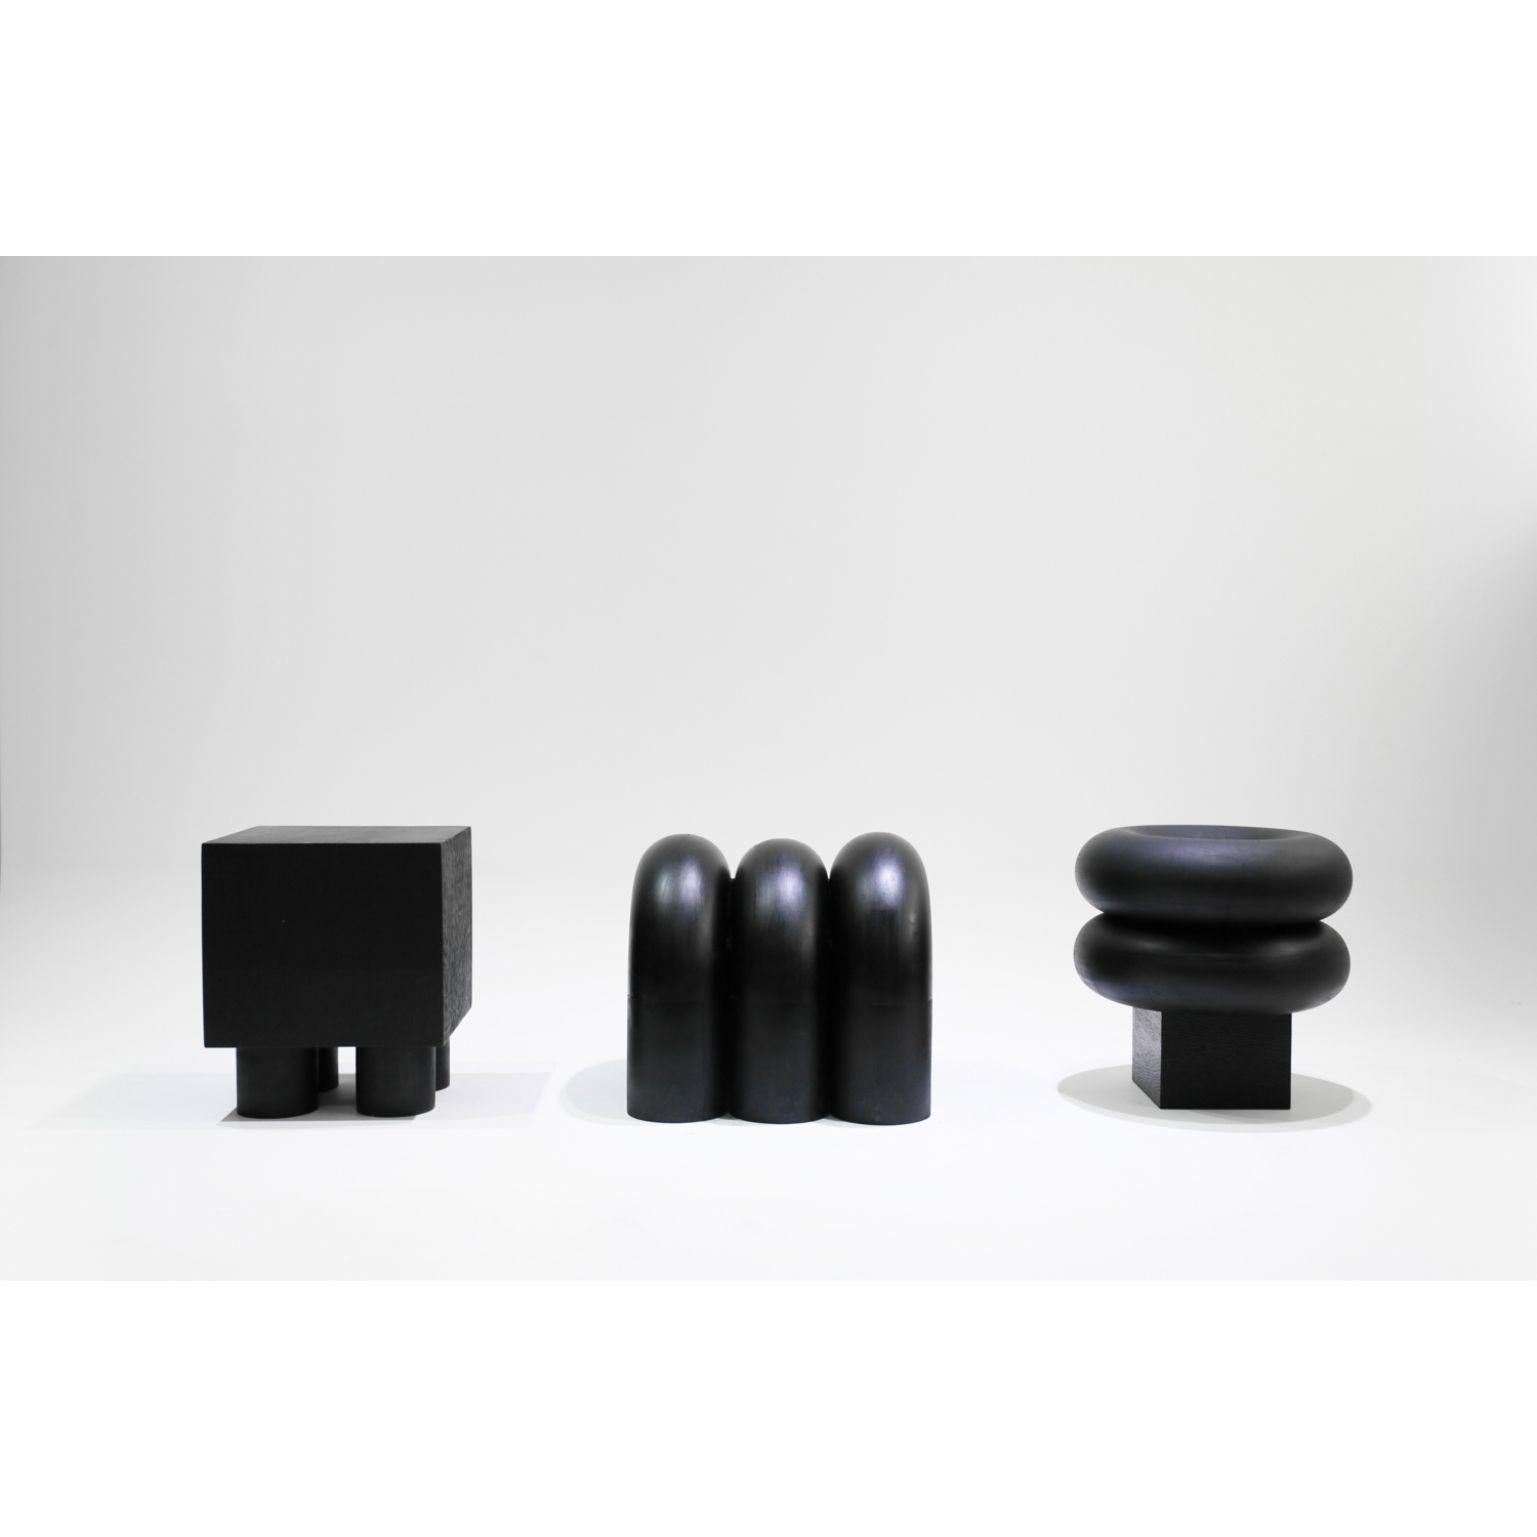 Set of 3 Time of Action by Chaeyoung Lee
Materials: Ebonized and Carved Wood
Dimensions: 100 x 100 x 50 cm

Time of Action is a minimal and carefully crafted furniture collection created by South Korean-based designer Chaeyoung Lee.
Time of Action